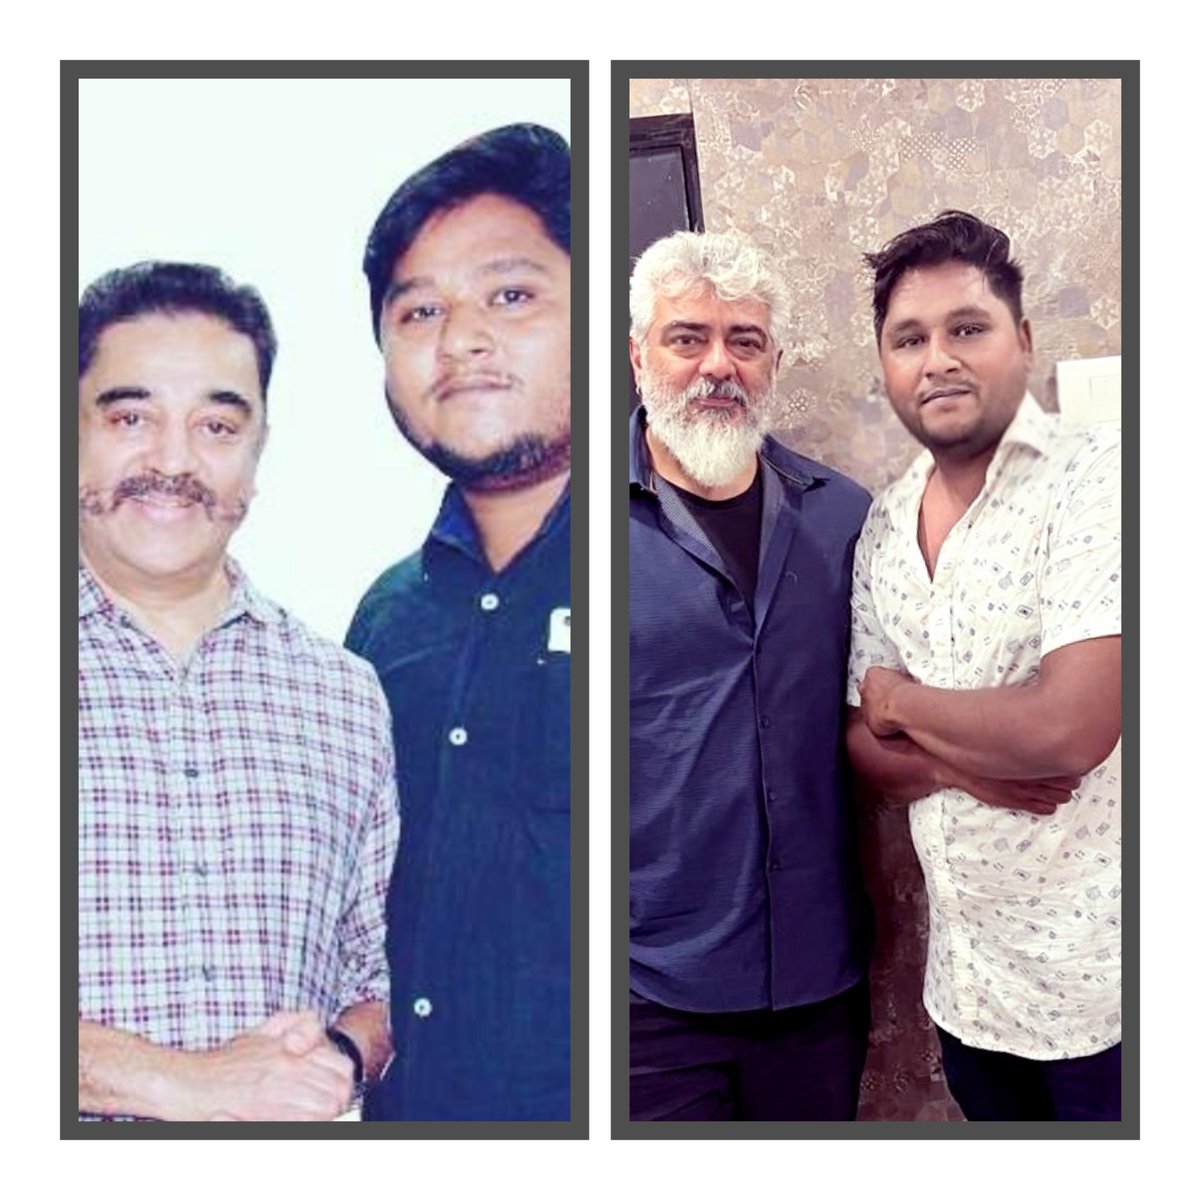 Happy Birthday To The Legend Of Indian Cinema @ikamalhaasan Sir, Best Wishes From #Ajith Sir Fan

#HappyBirthdayKamalHaasan
#HBDKamalHaasan
#Thunivu